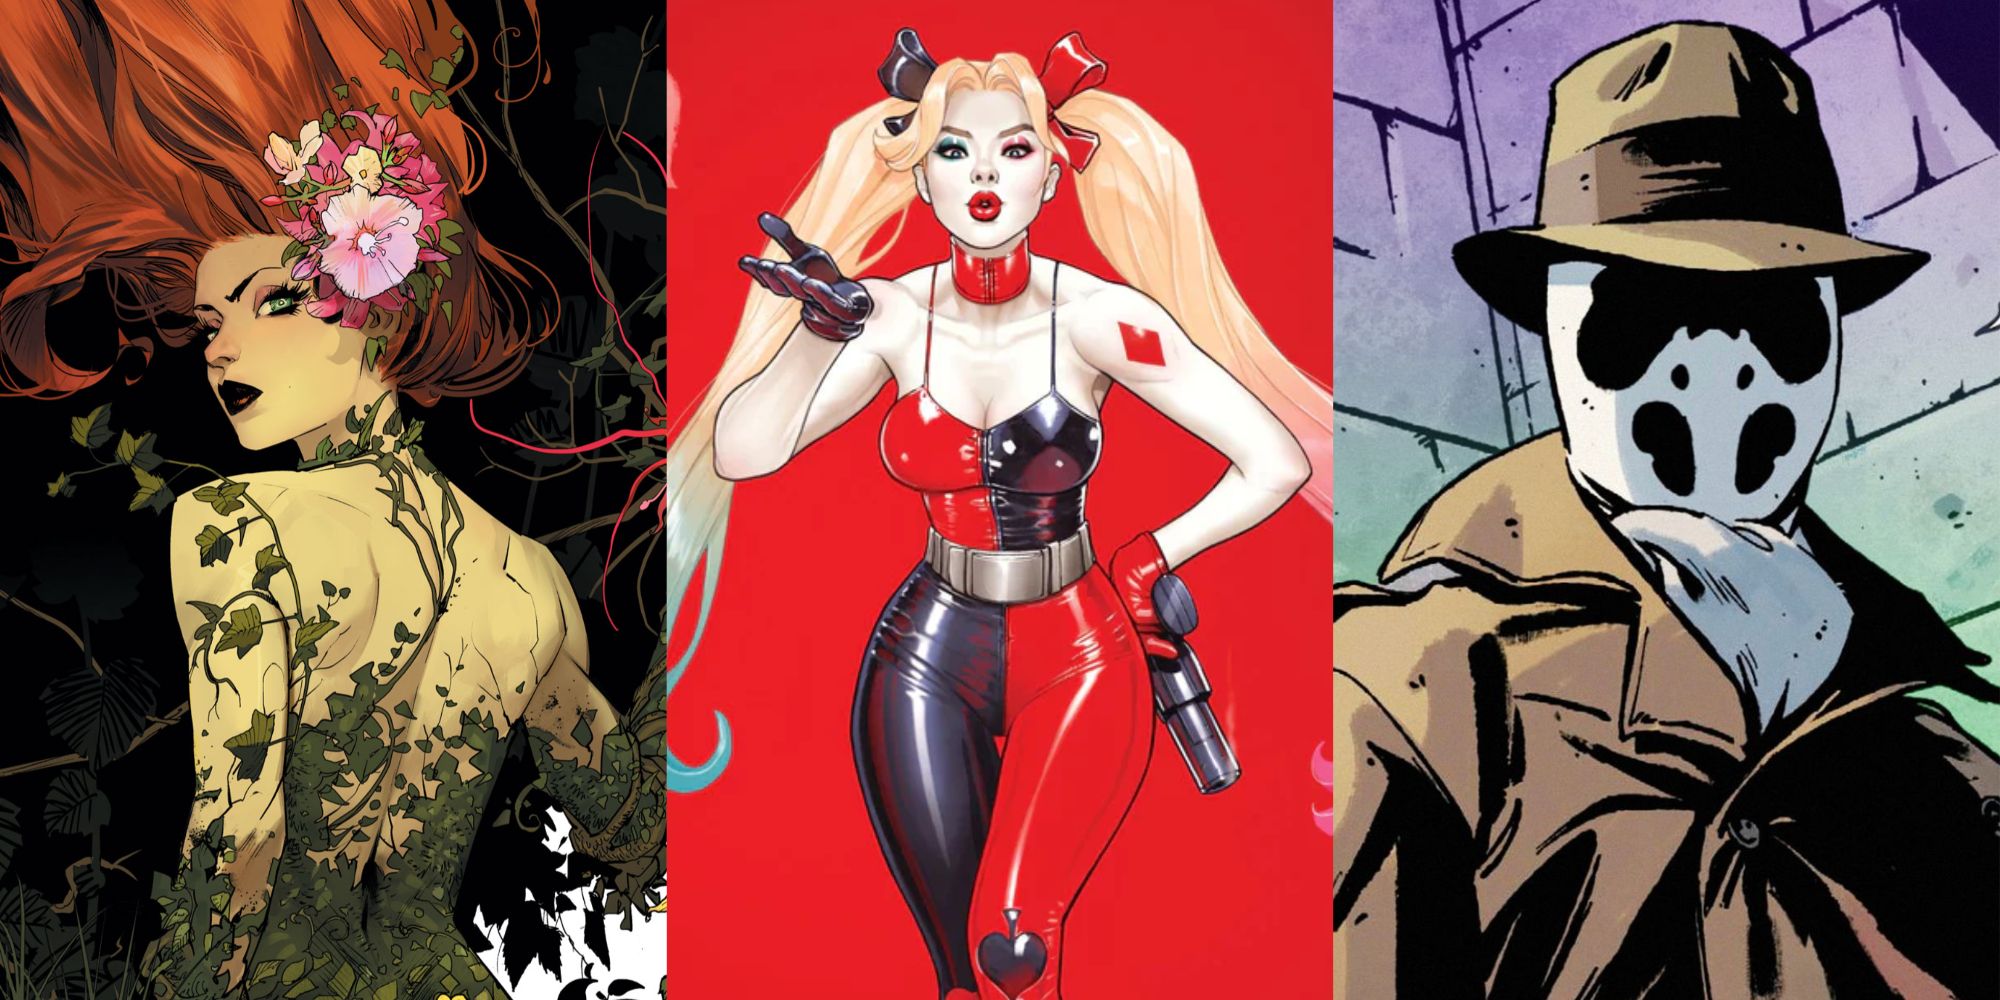 Split image of Poison Ivy, Harley Quinn, and Rorschach from DC Comics.